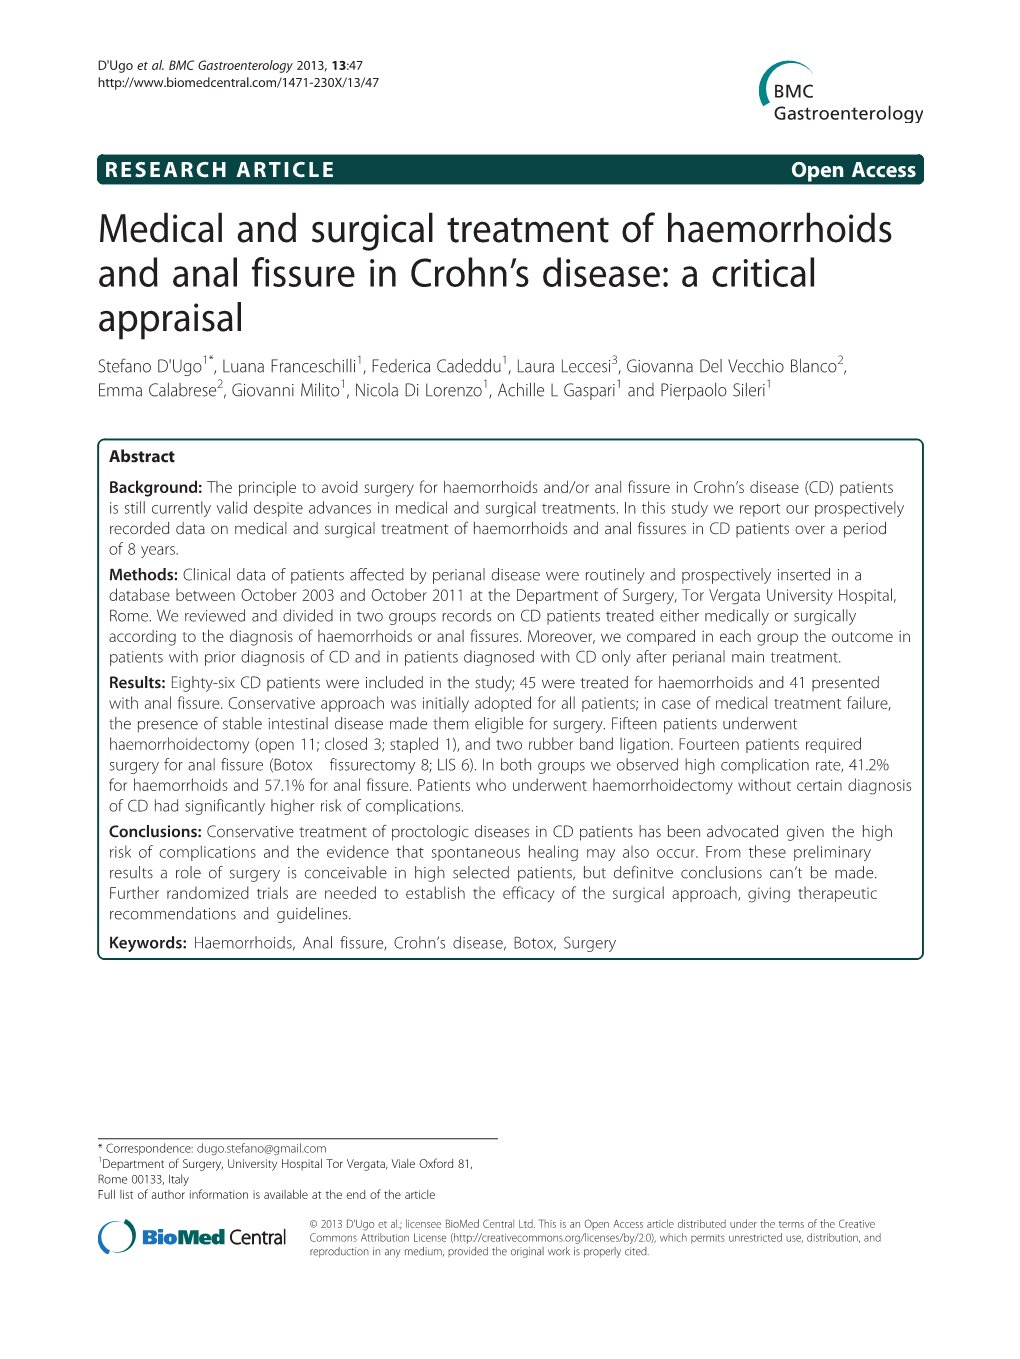 Medical and Surgical Treatment of Haemorrhoids and Anal